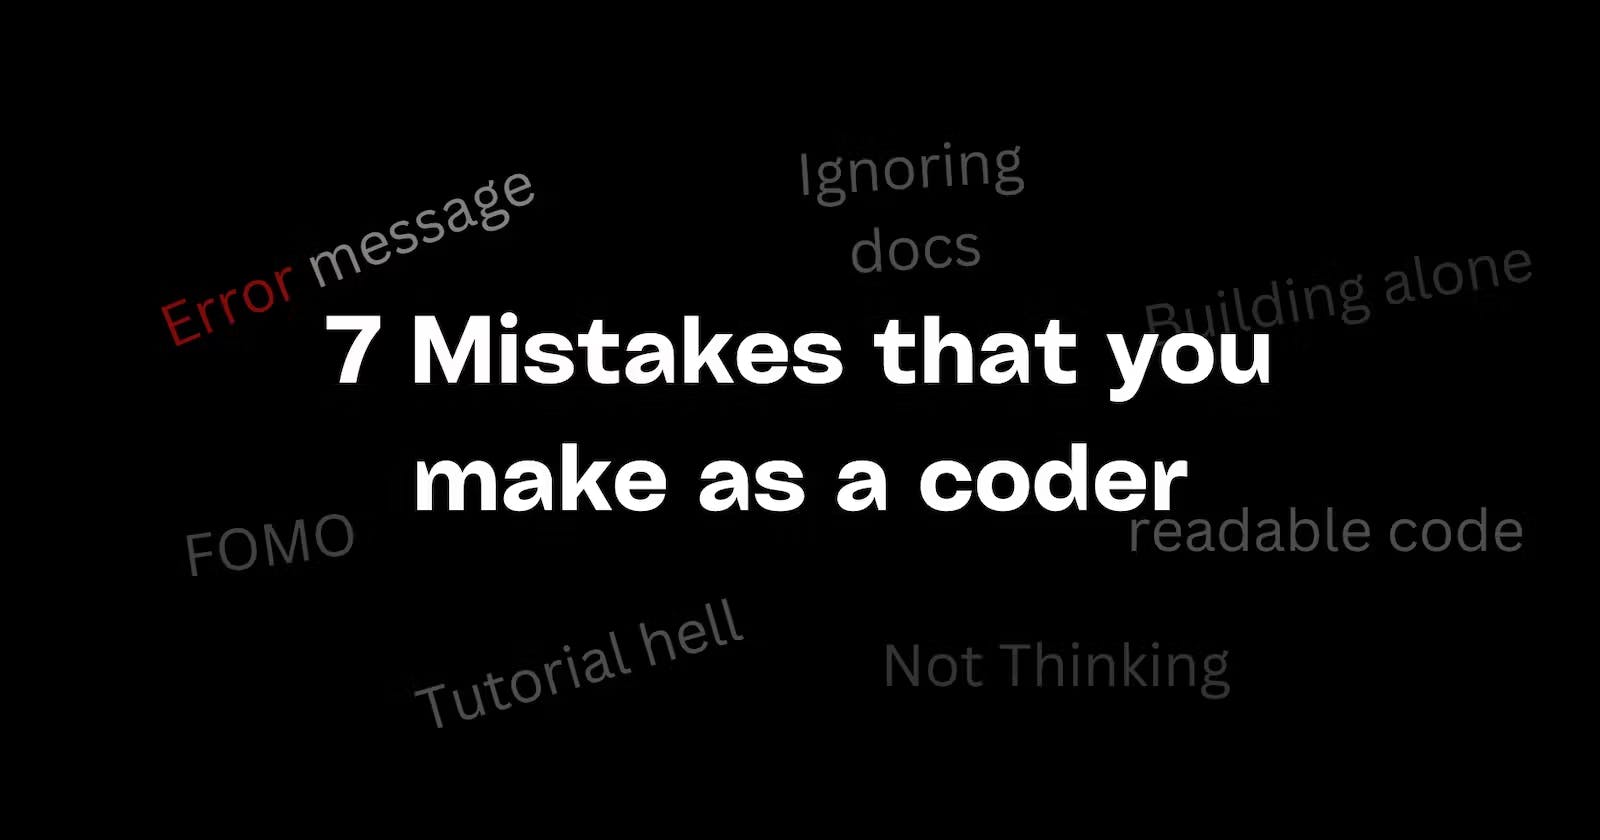 7 Mistakes that you make as a coder